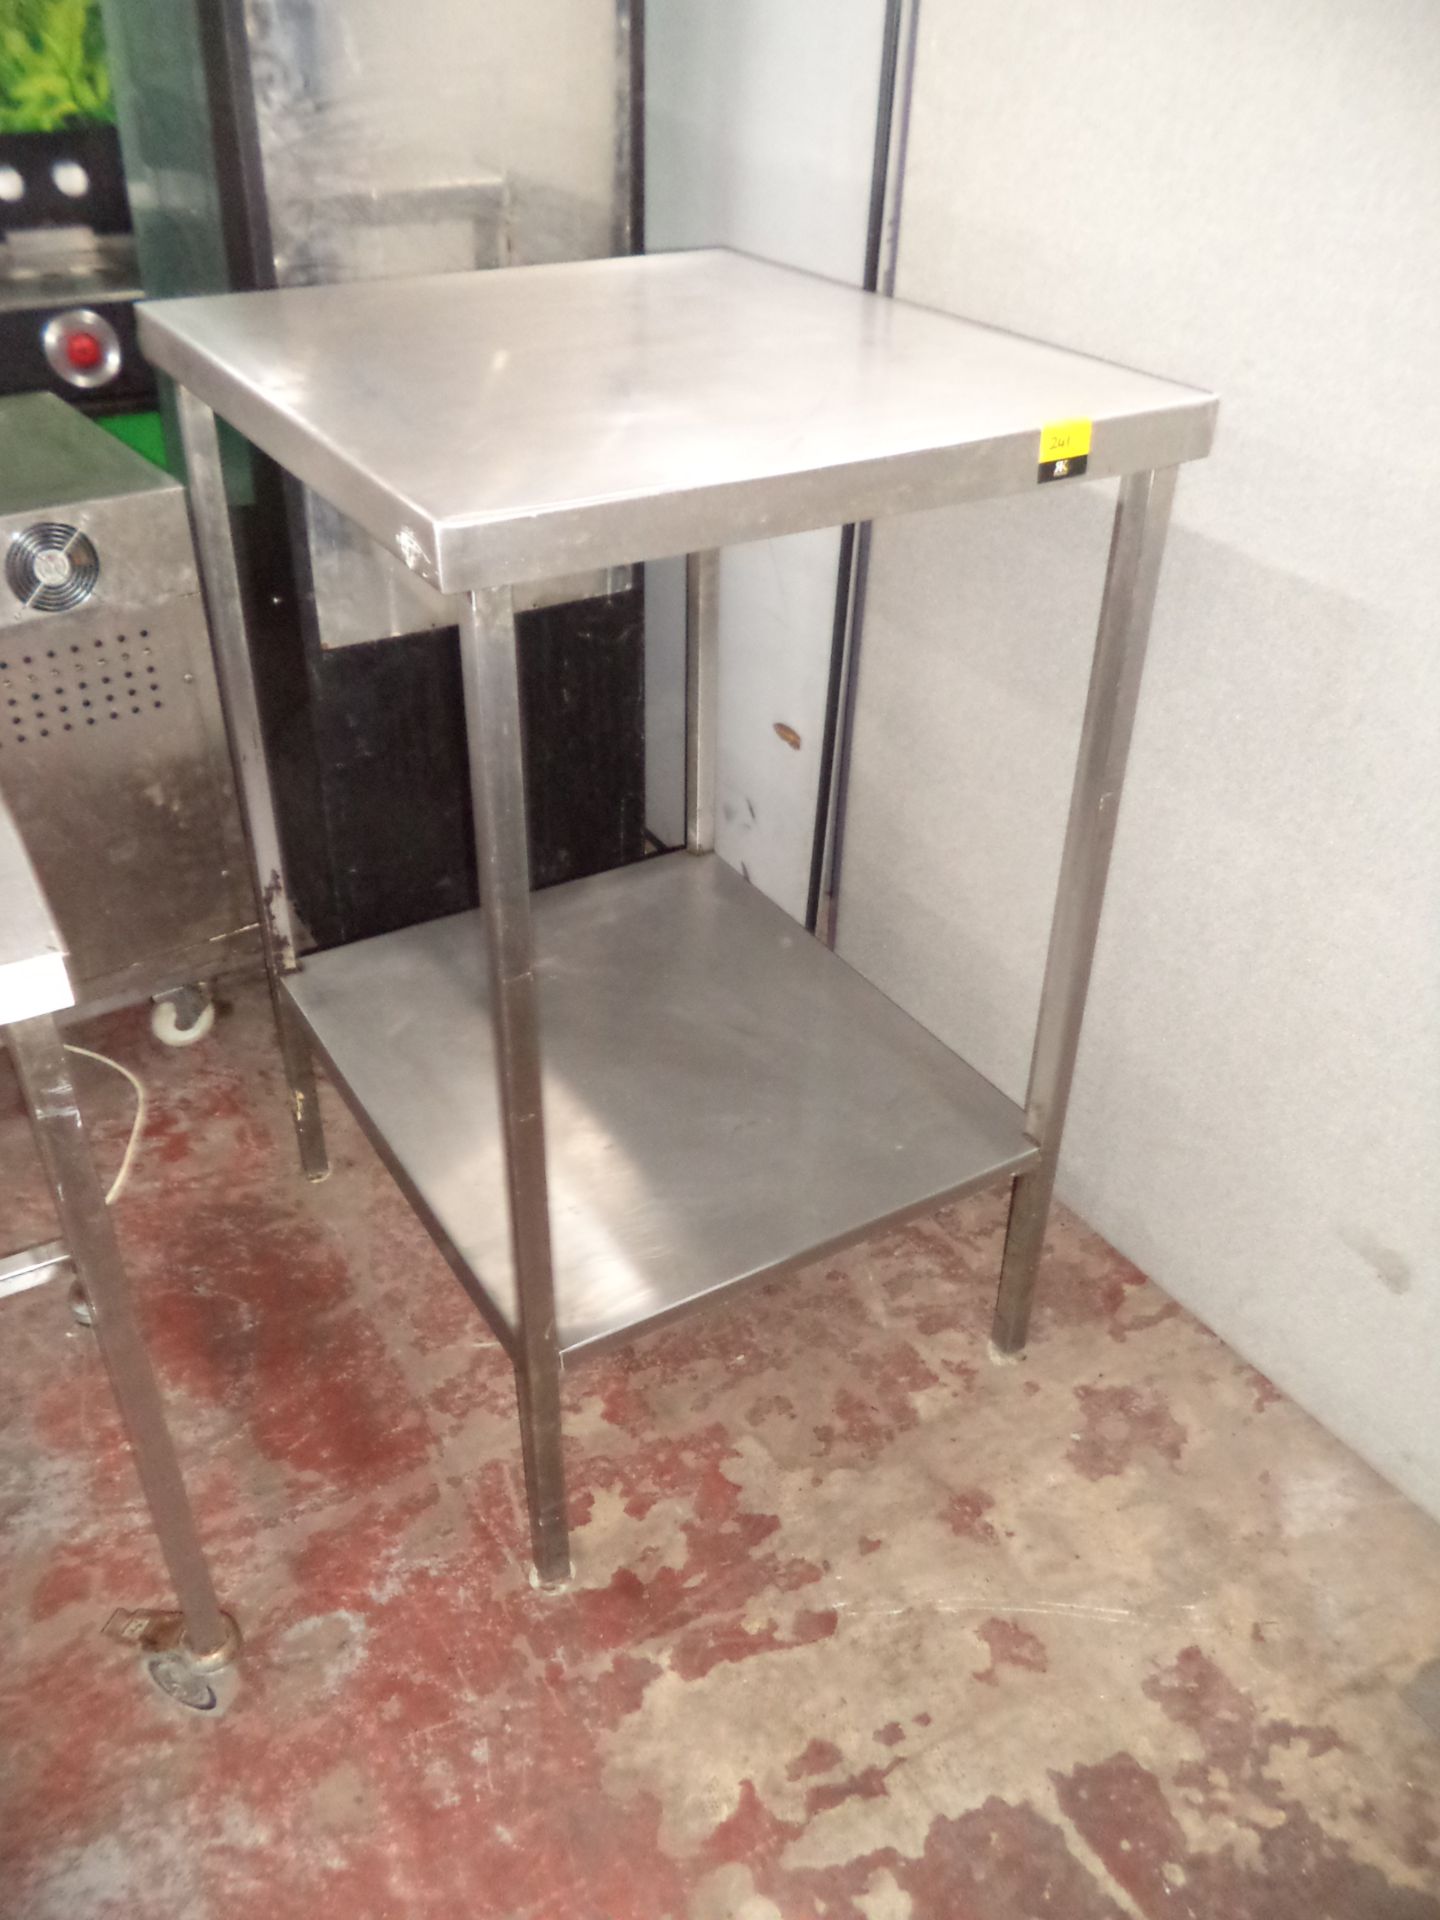 Tall stainless steel twin-tier table IMPORTANT: Please remember goods successfully bid upon must